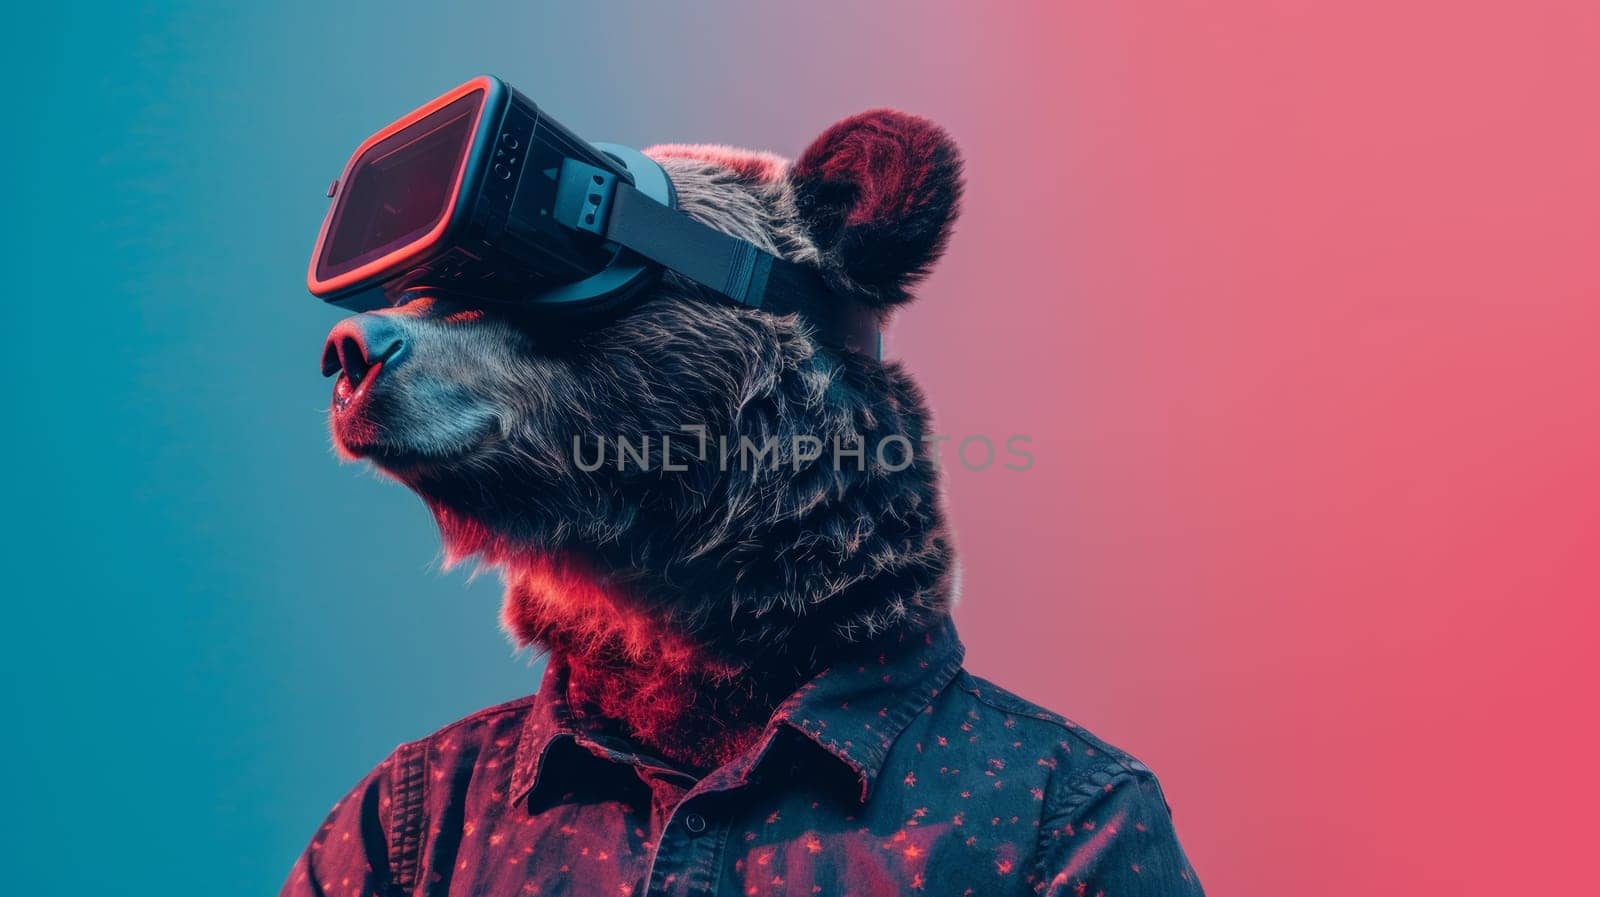 A bear wearing a vr headset with the words "i'm not afraid of anything", AI by starush